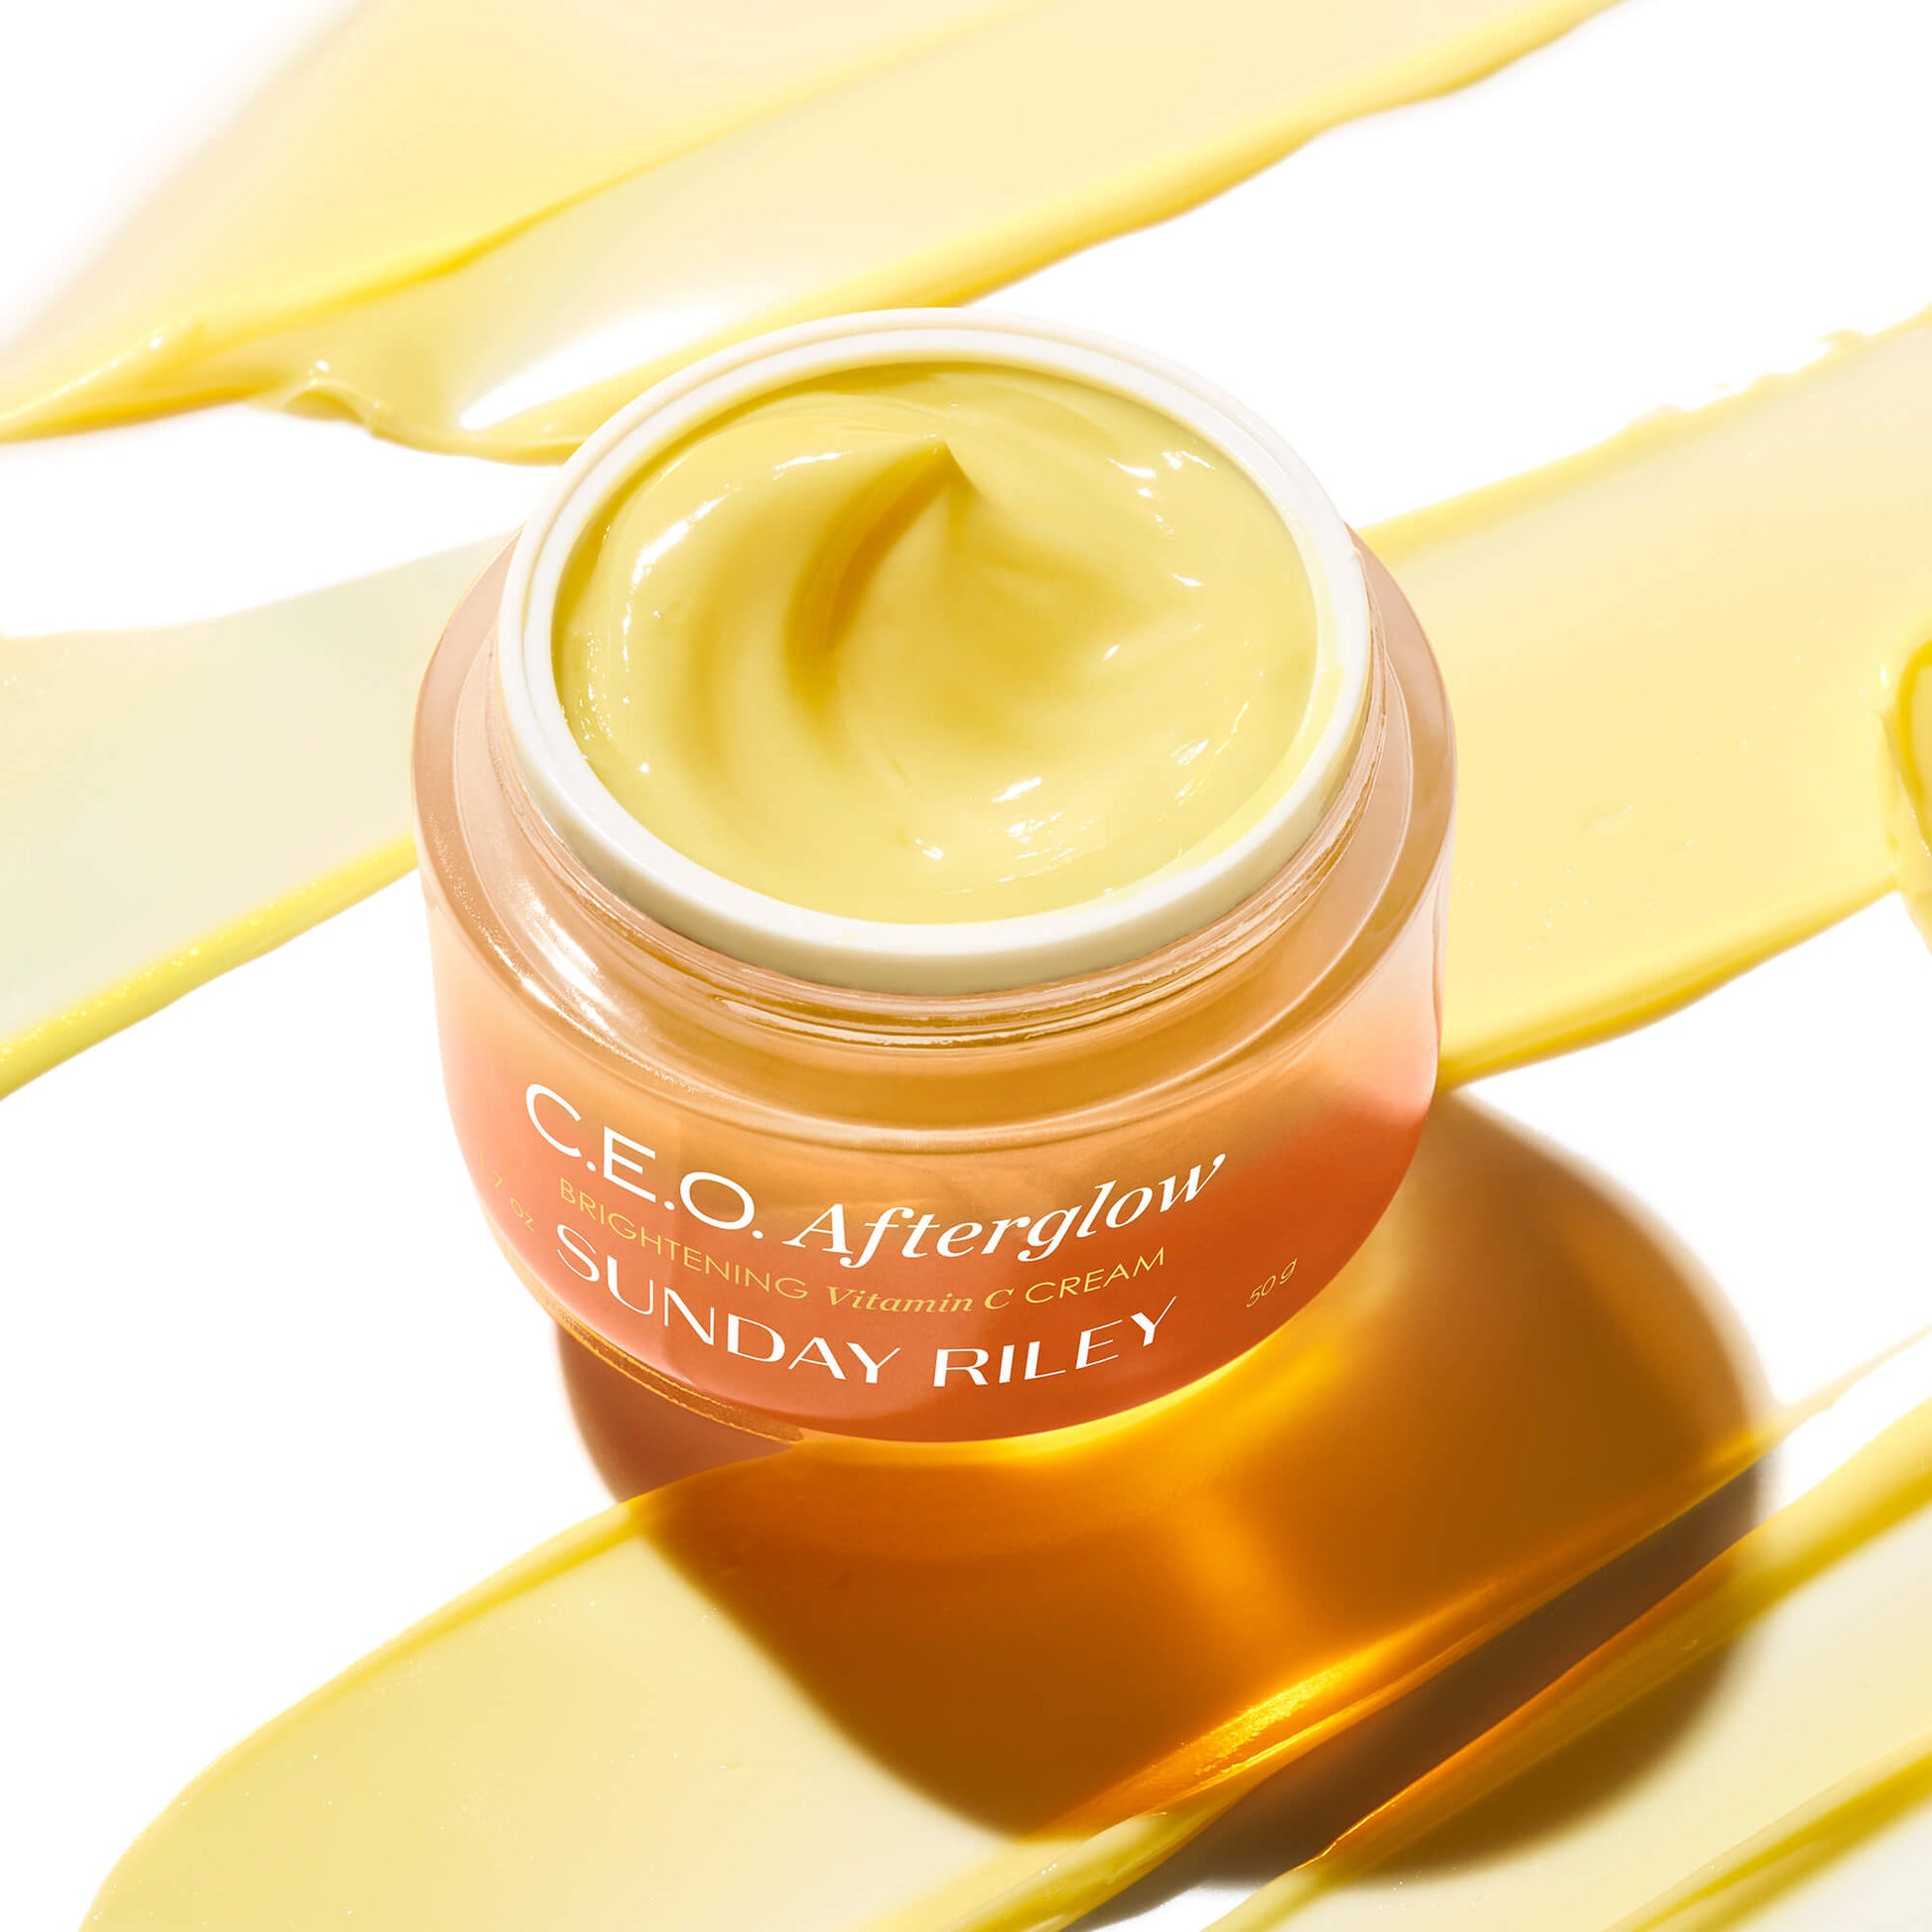 C.E.O. Afterglow jar on top of yellow goop smear